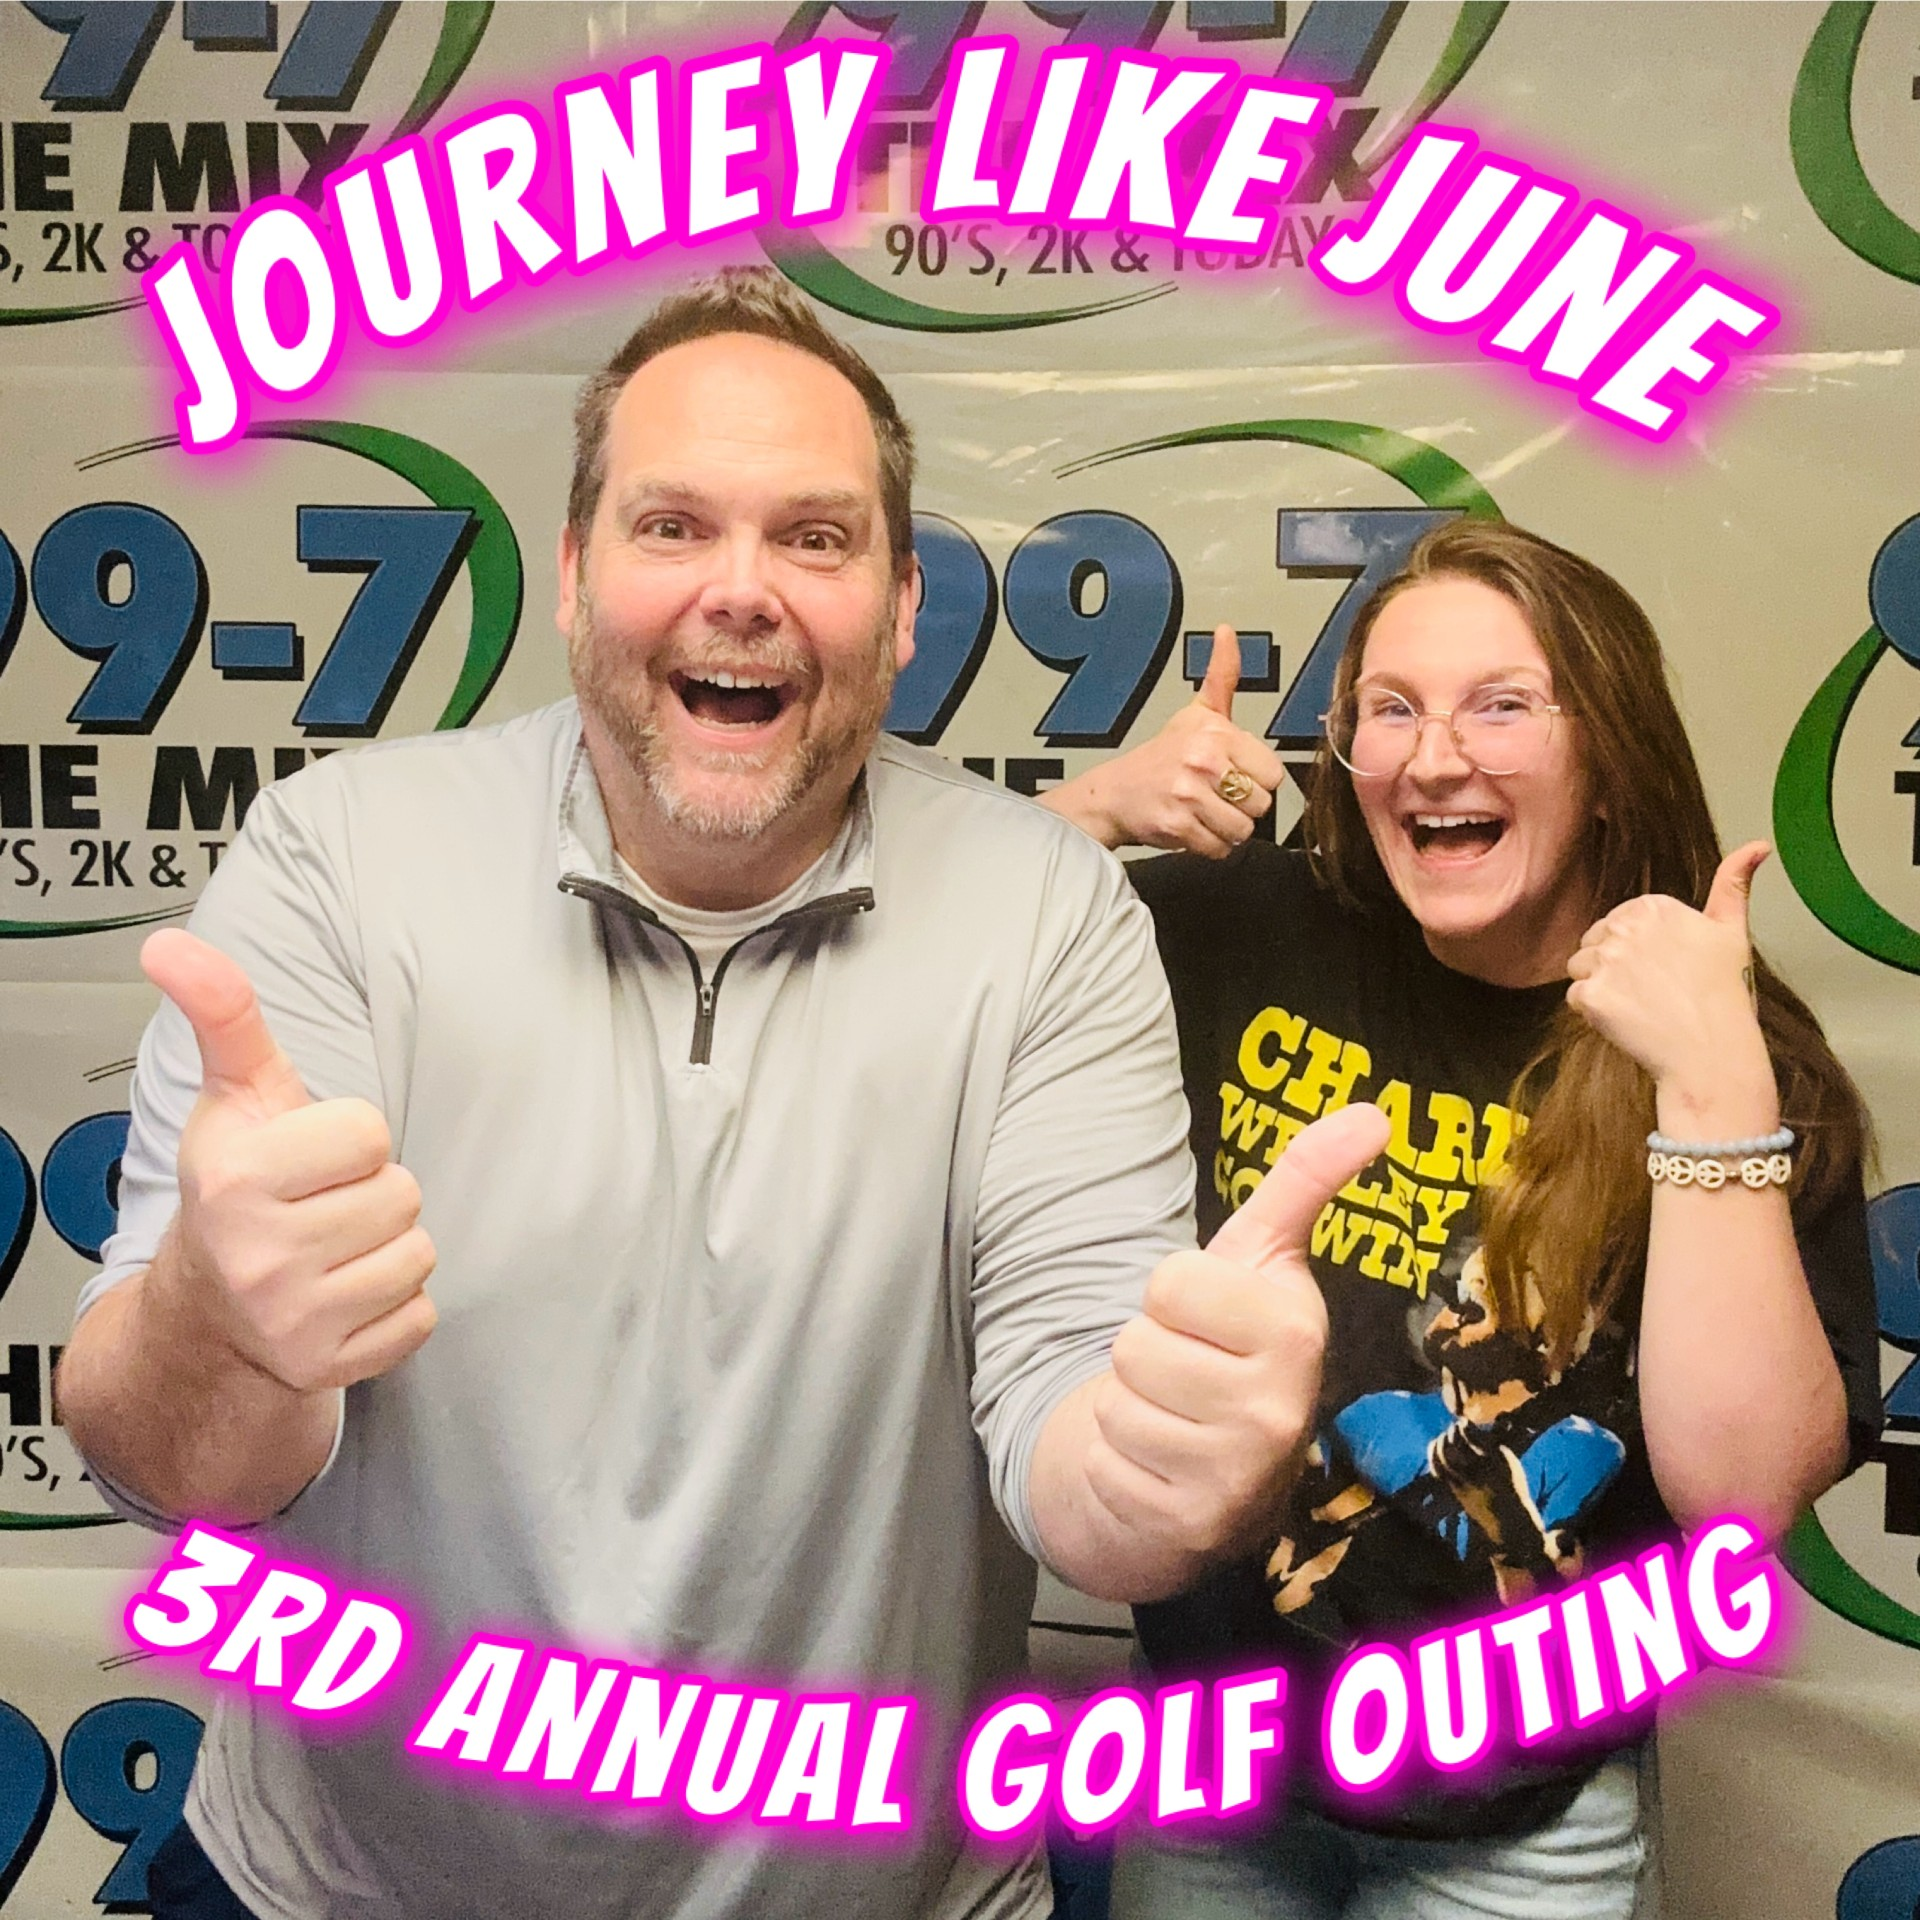 Journey Like June 3rd Annual Golf Outing